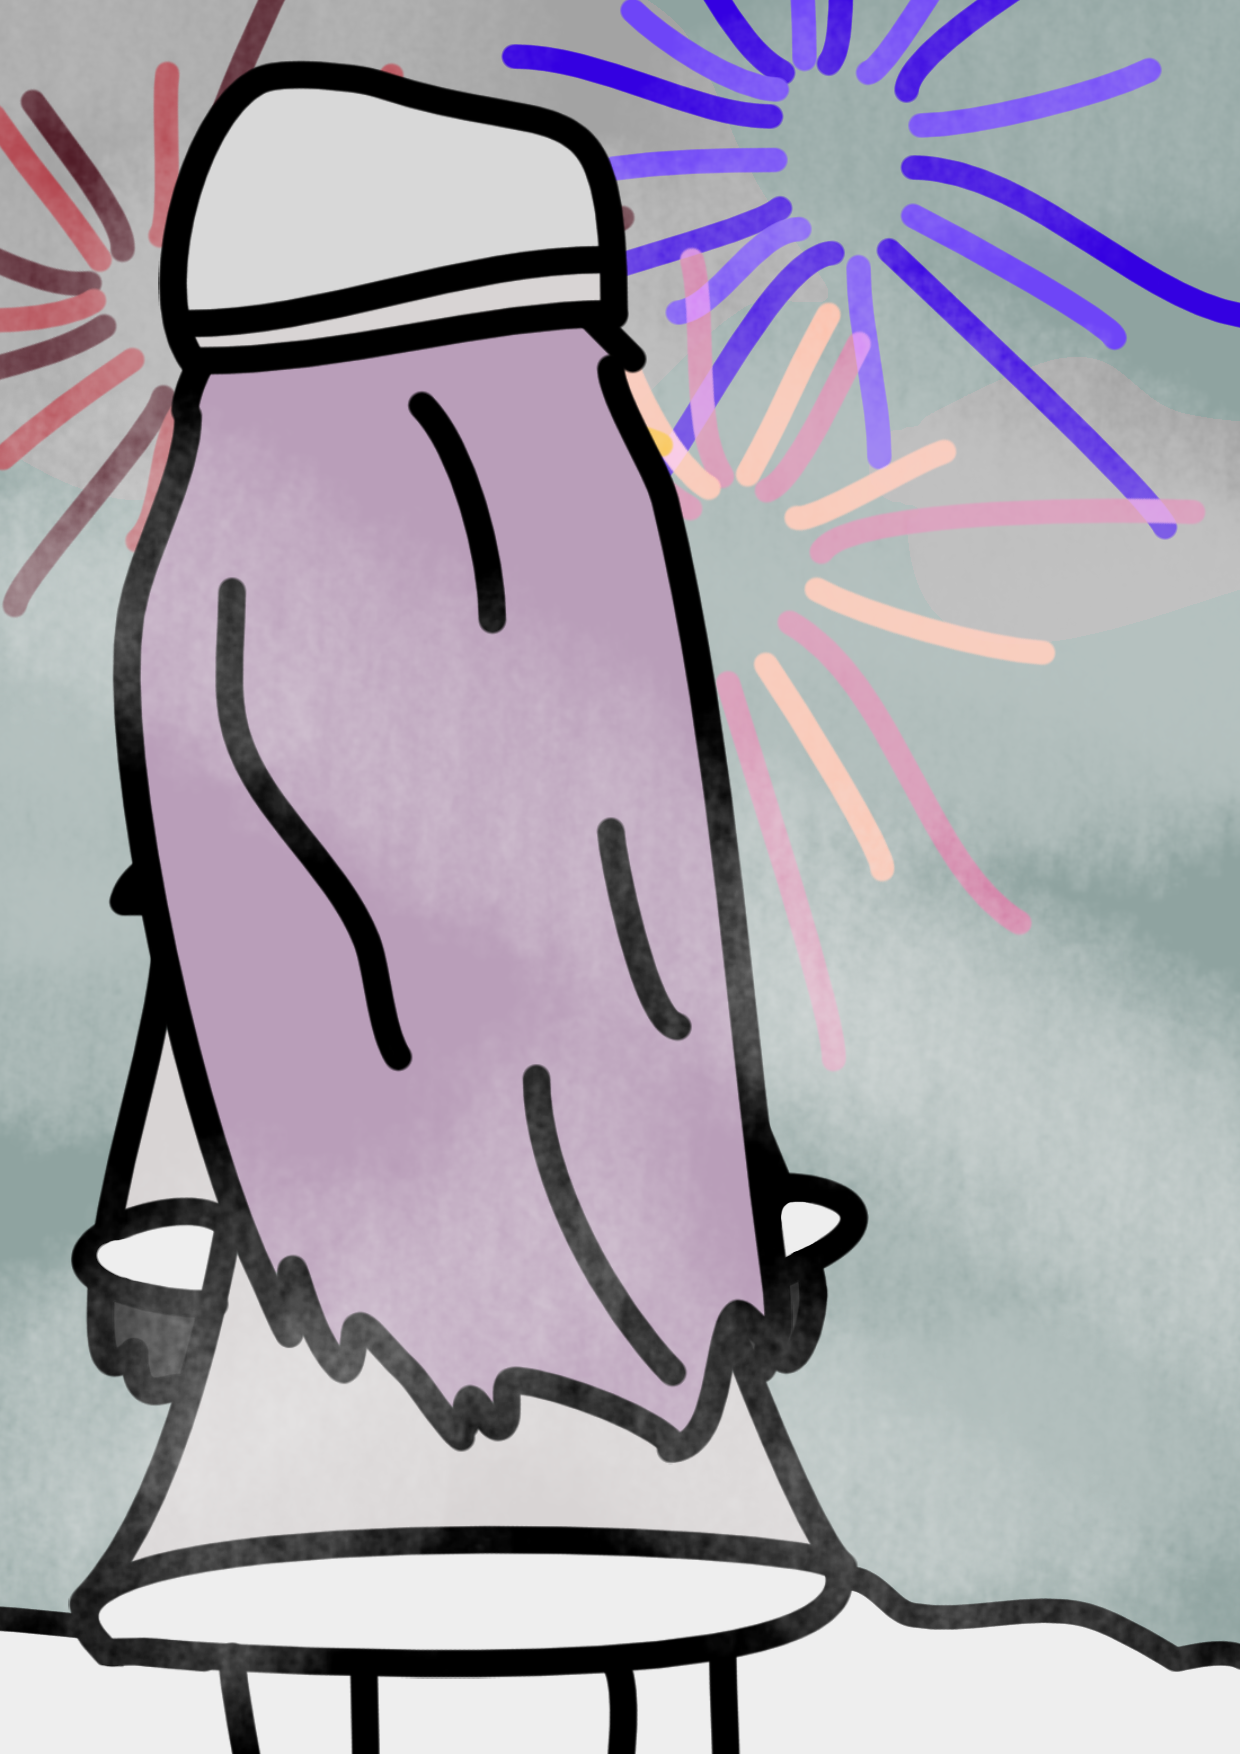 A digital drawing of Luka Megurine from the back view with the Eternal White module, the attire being a long white coat, black gloves and white high-heel boots, in snowy outdoors, looking at the sky filled with fireworks.